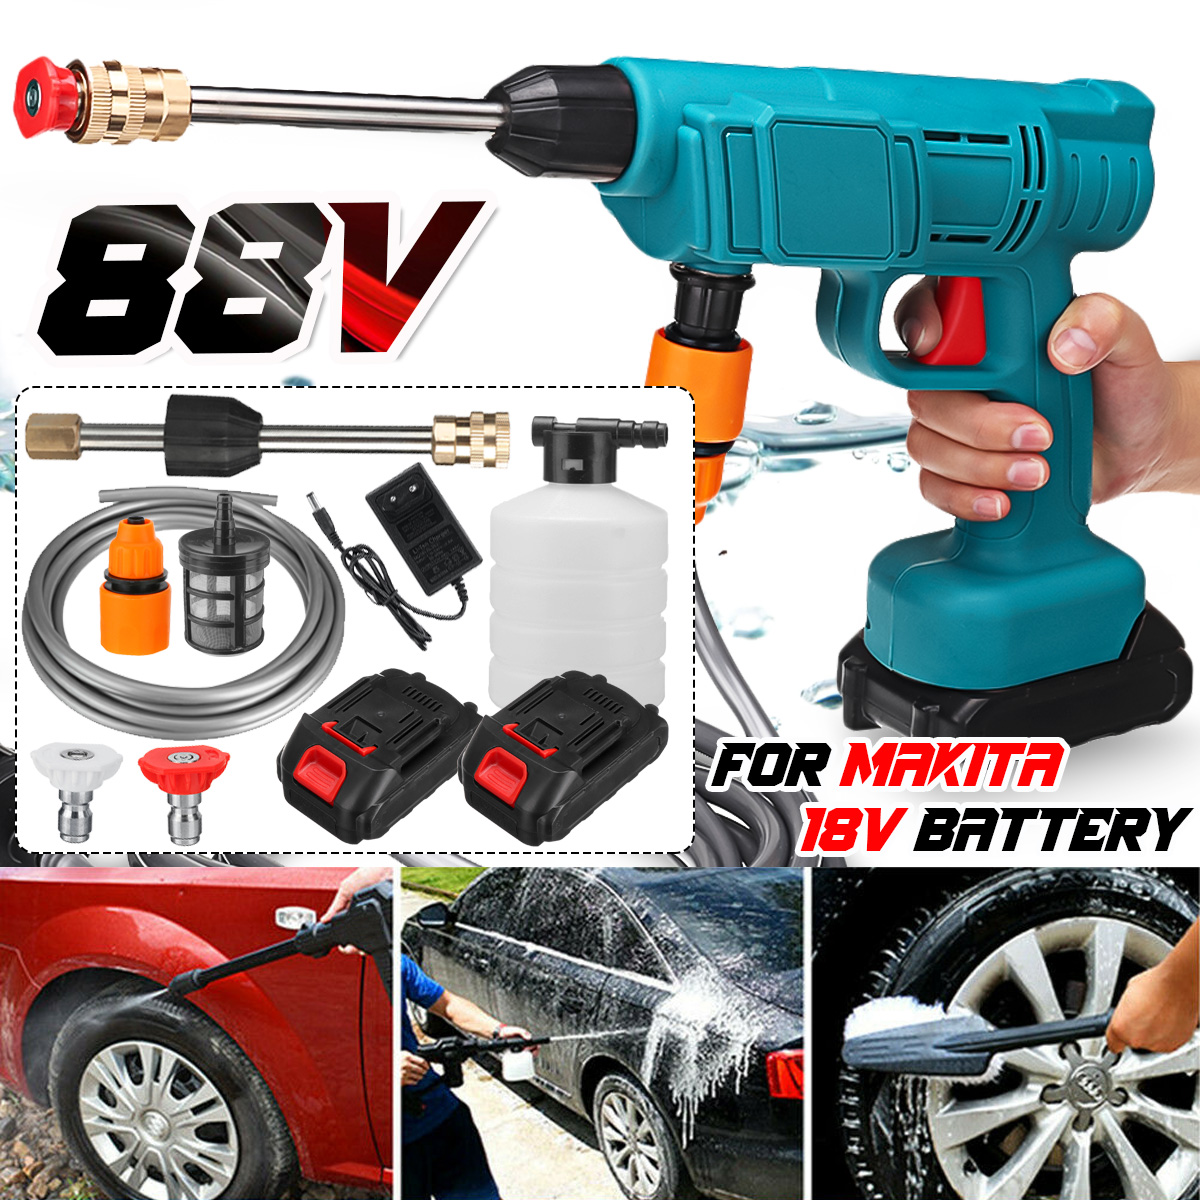 88VF-Cordless-High-Pressure-Washer-Car-Washing-Spray-Guns-Water-Cleaner-W-None12-Battery-For-Makita-1875161-2